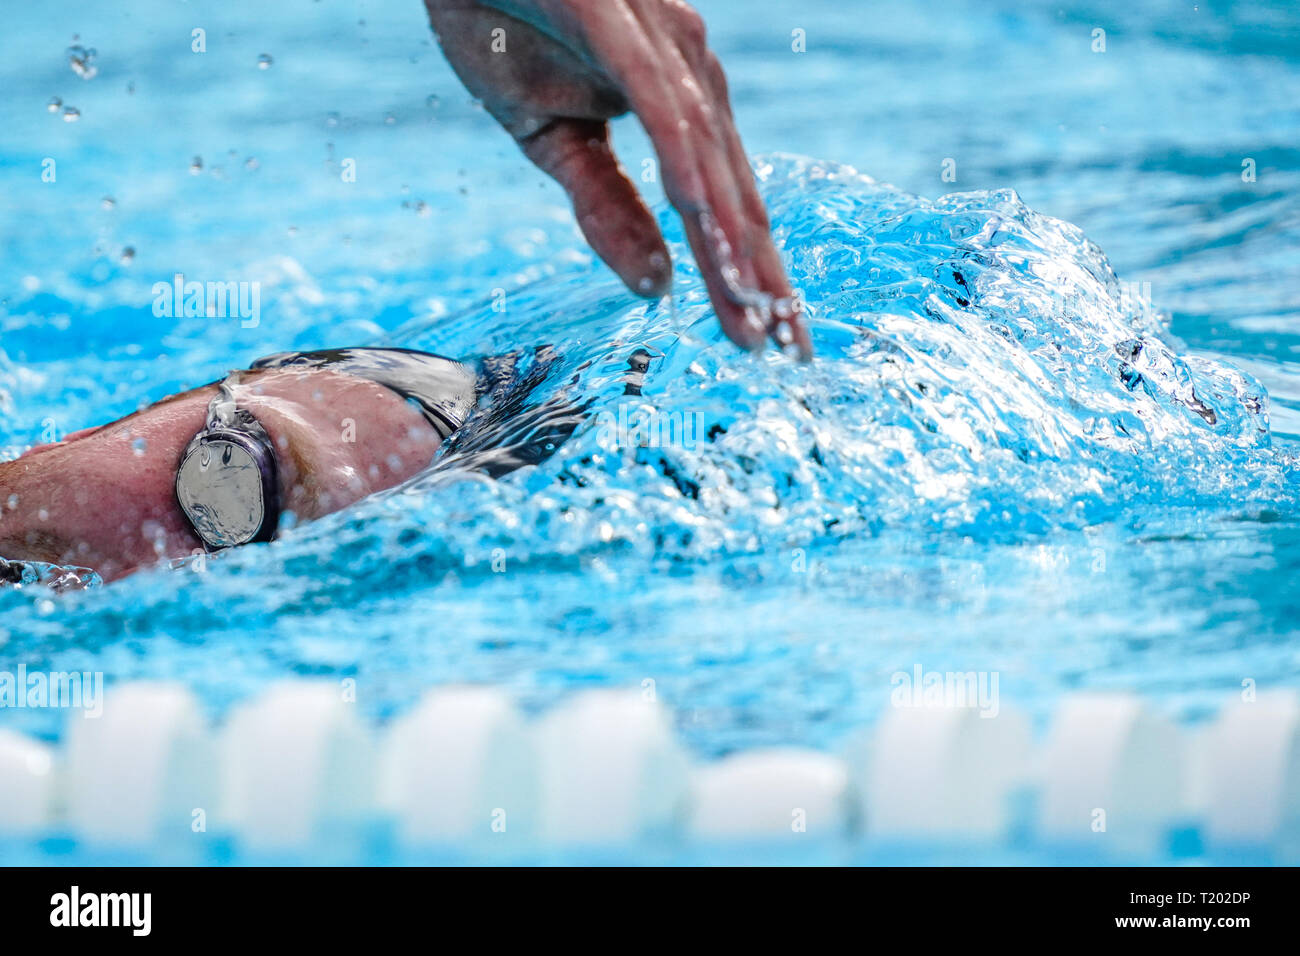 Details with a professional athlete swimming in an olympic swimming pool Stock Photo